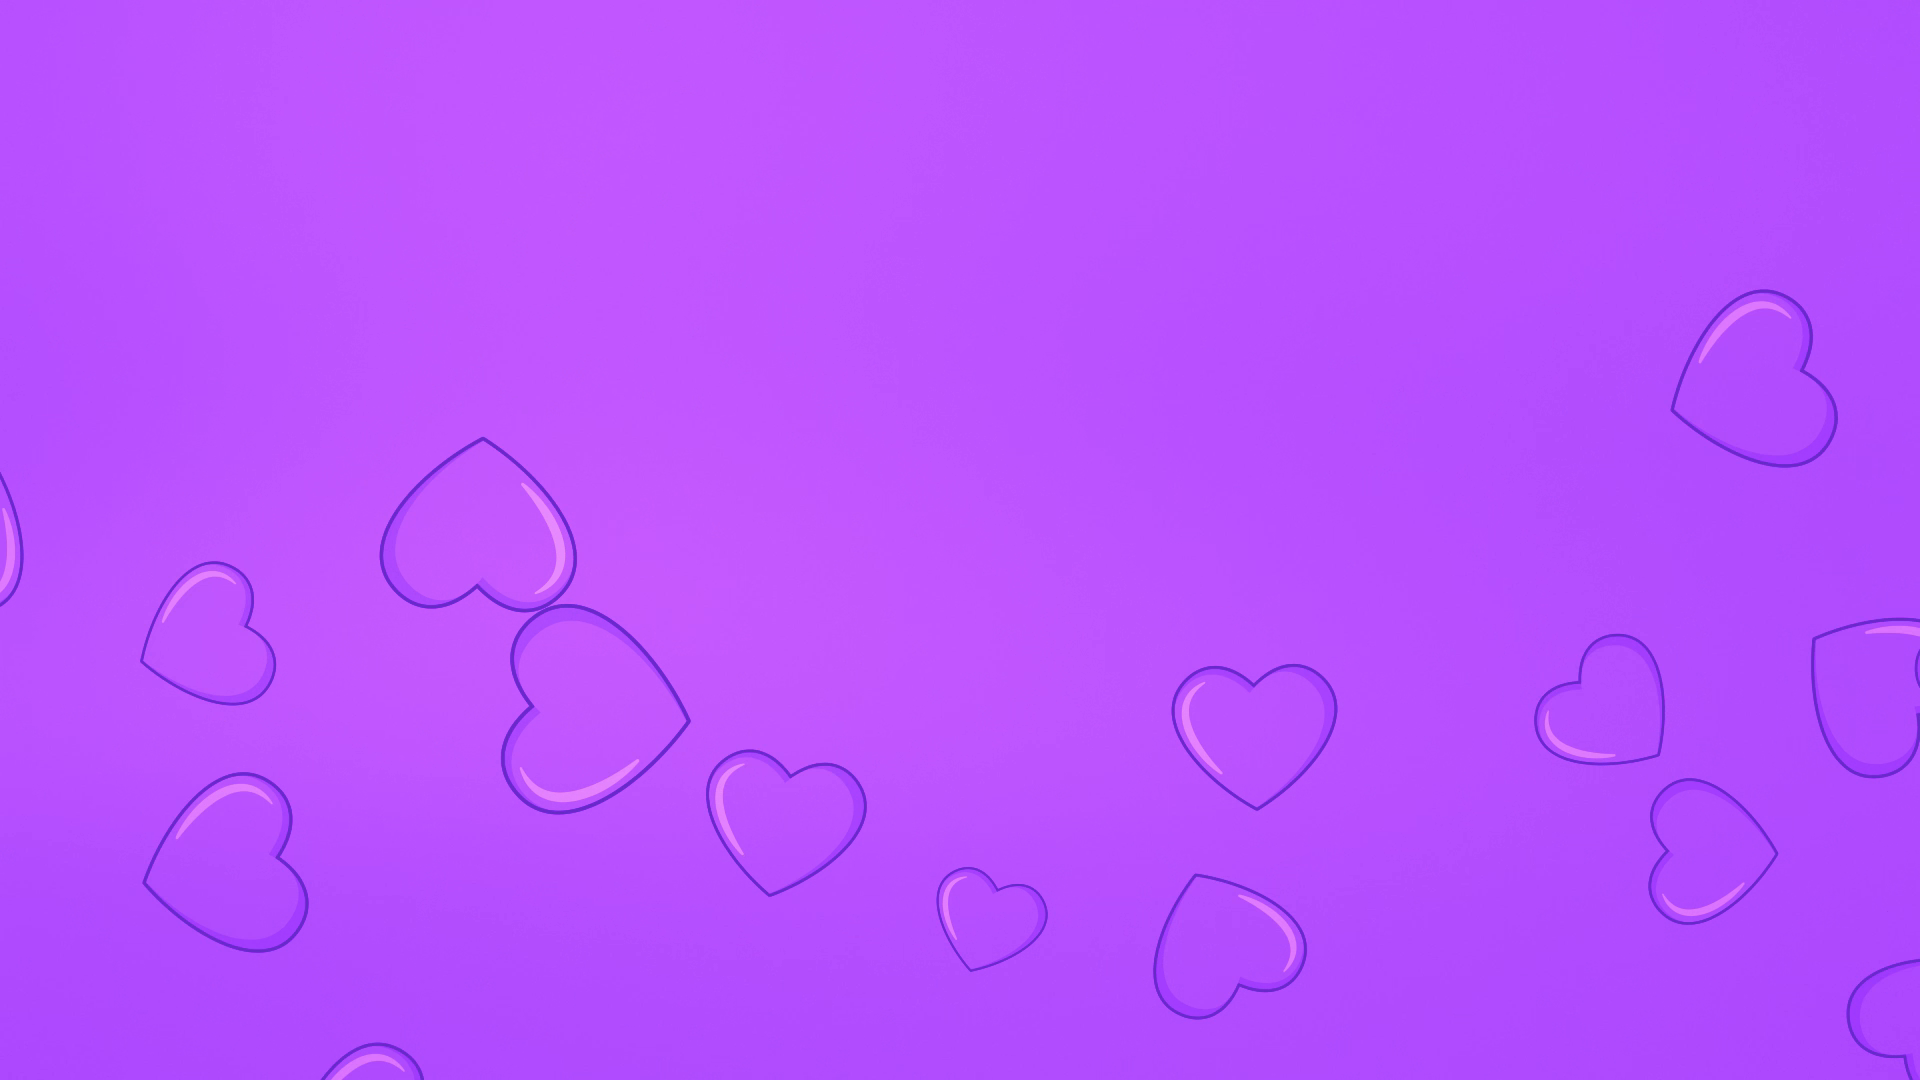 Valentines Purple Heart Background Effect. FootageCrate FX Archives